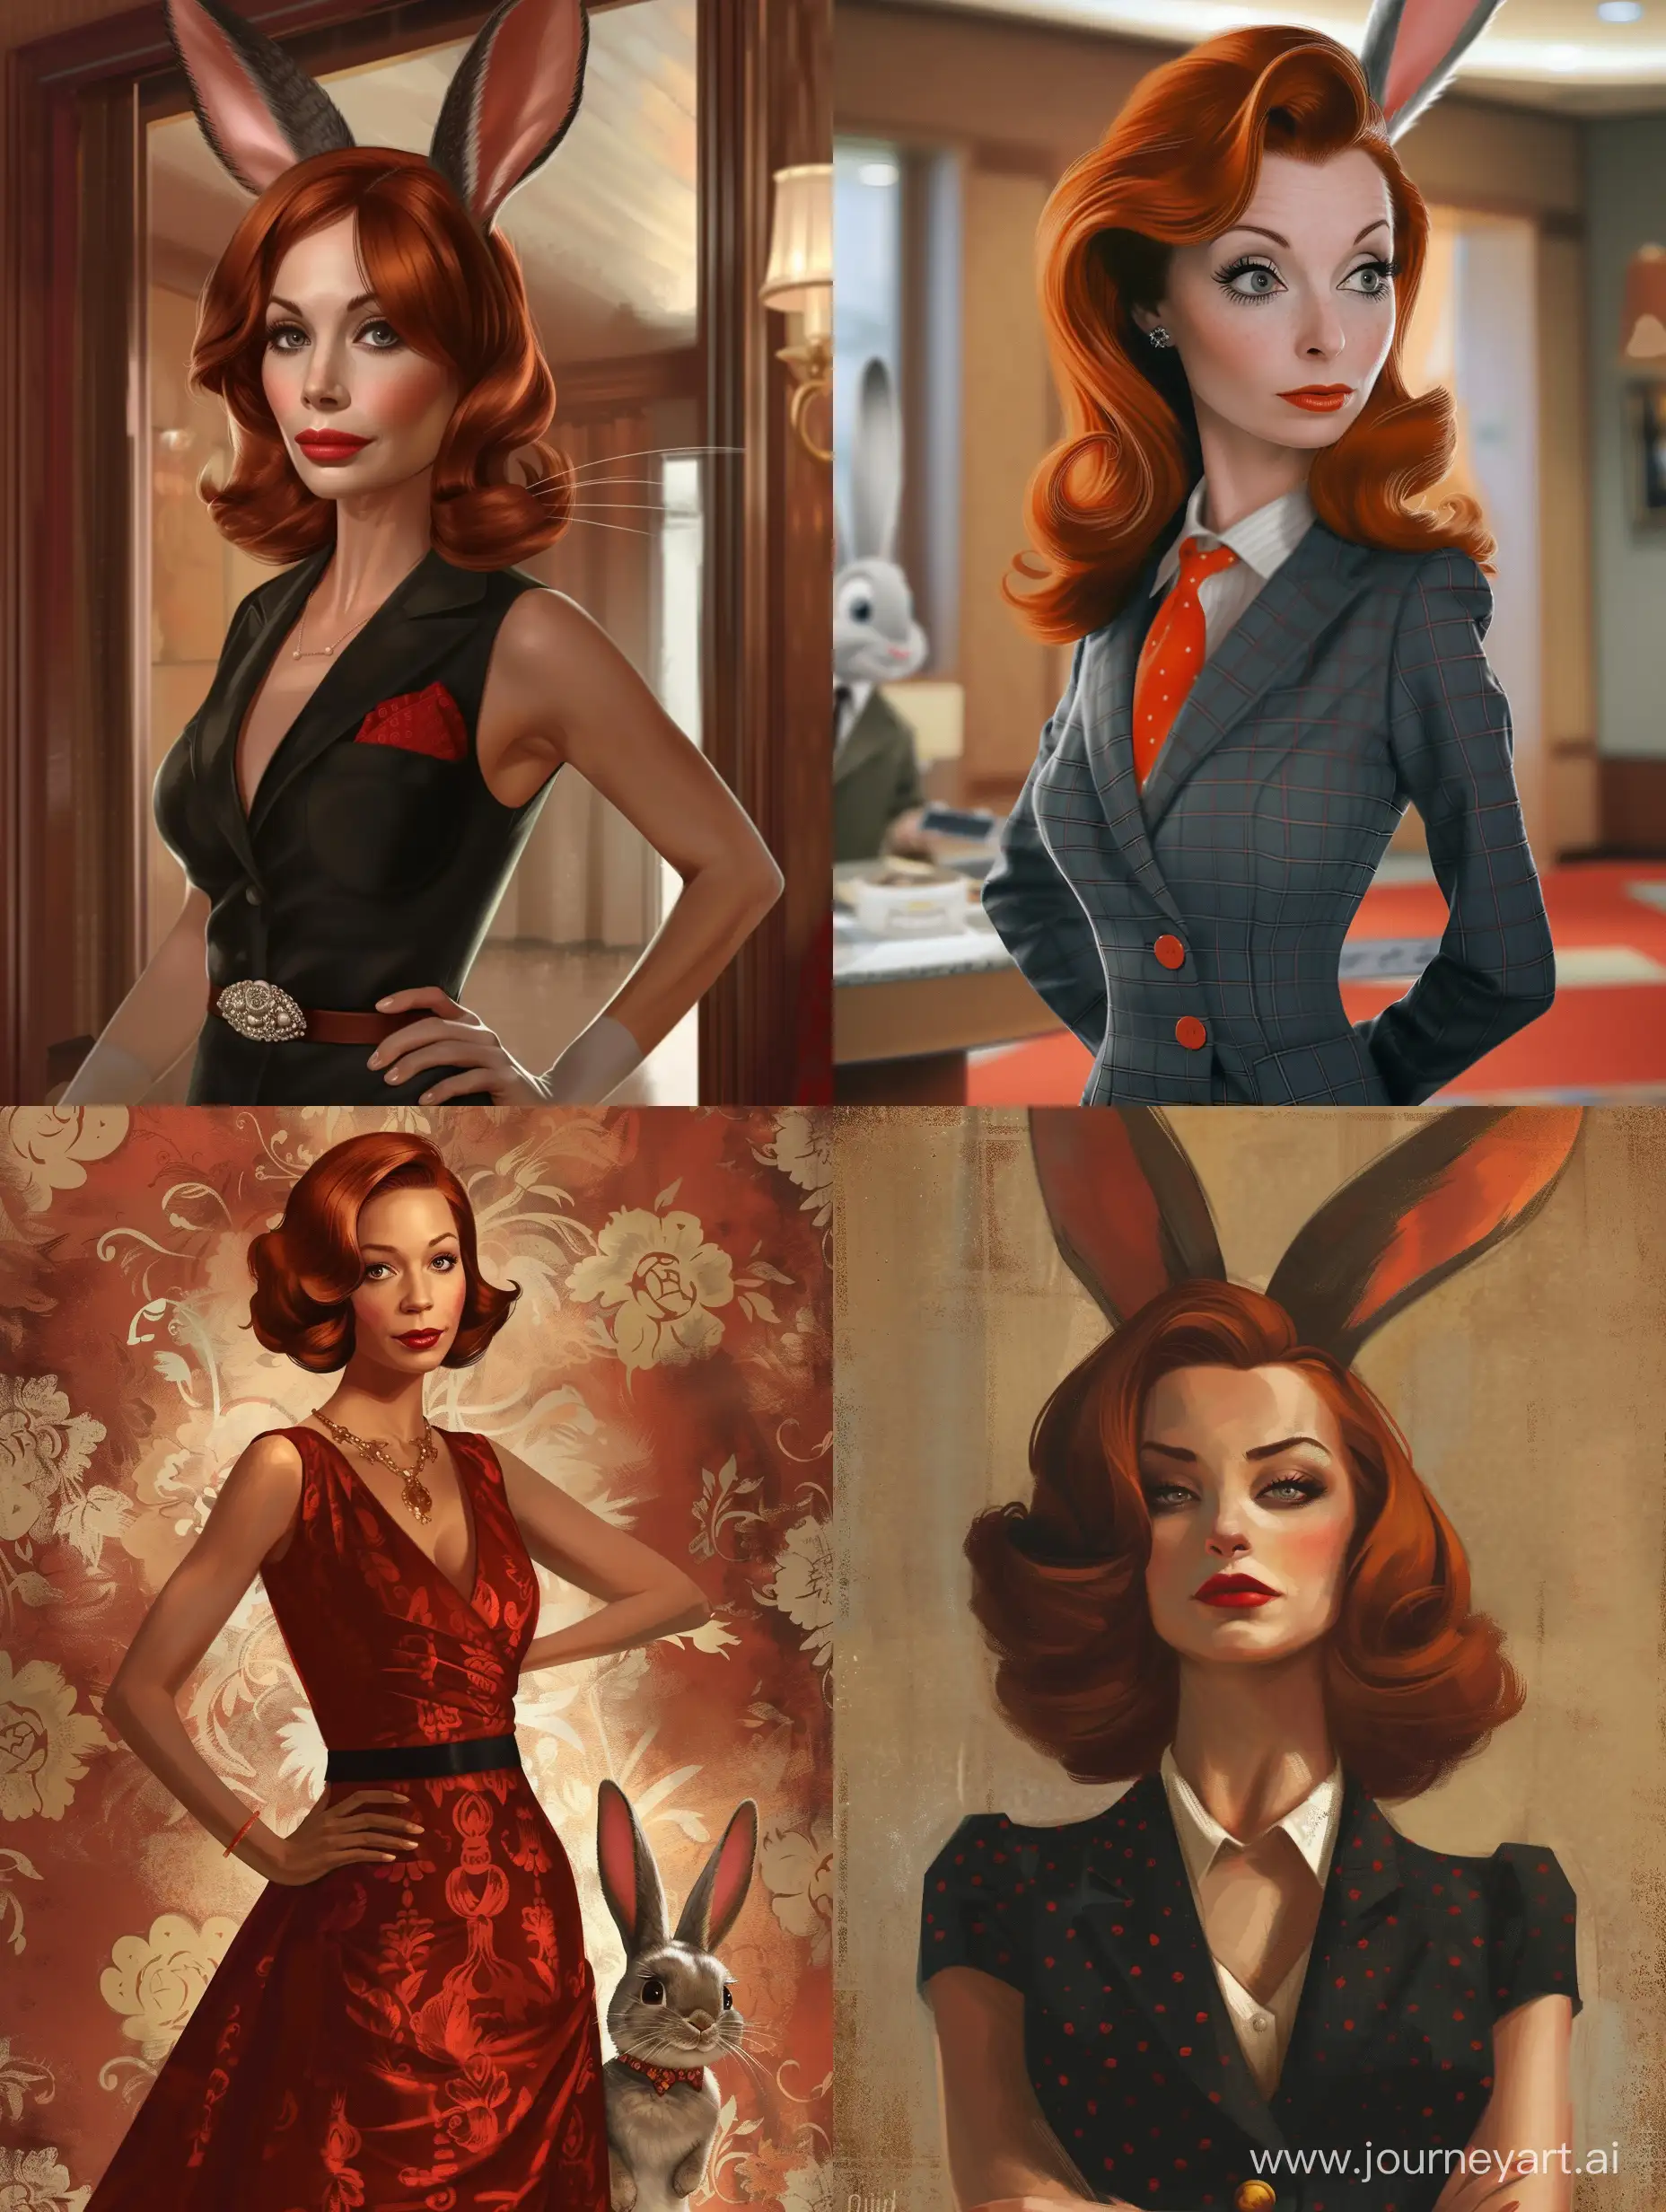 joan from mad men in the style of jessica rabbit